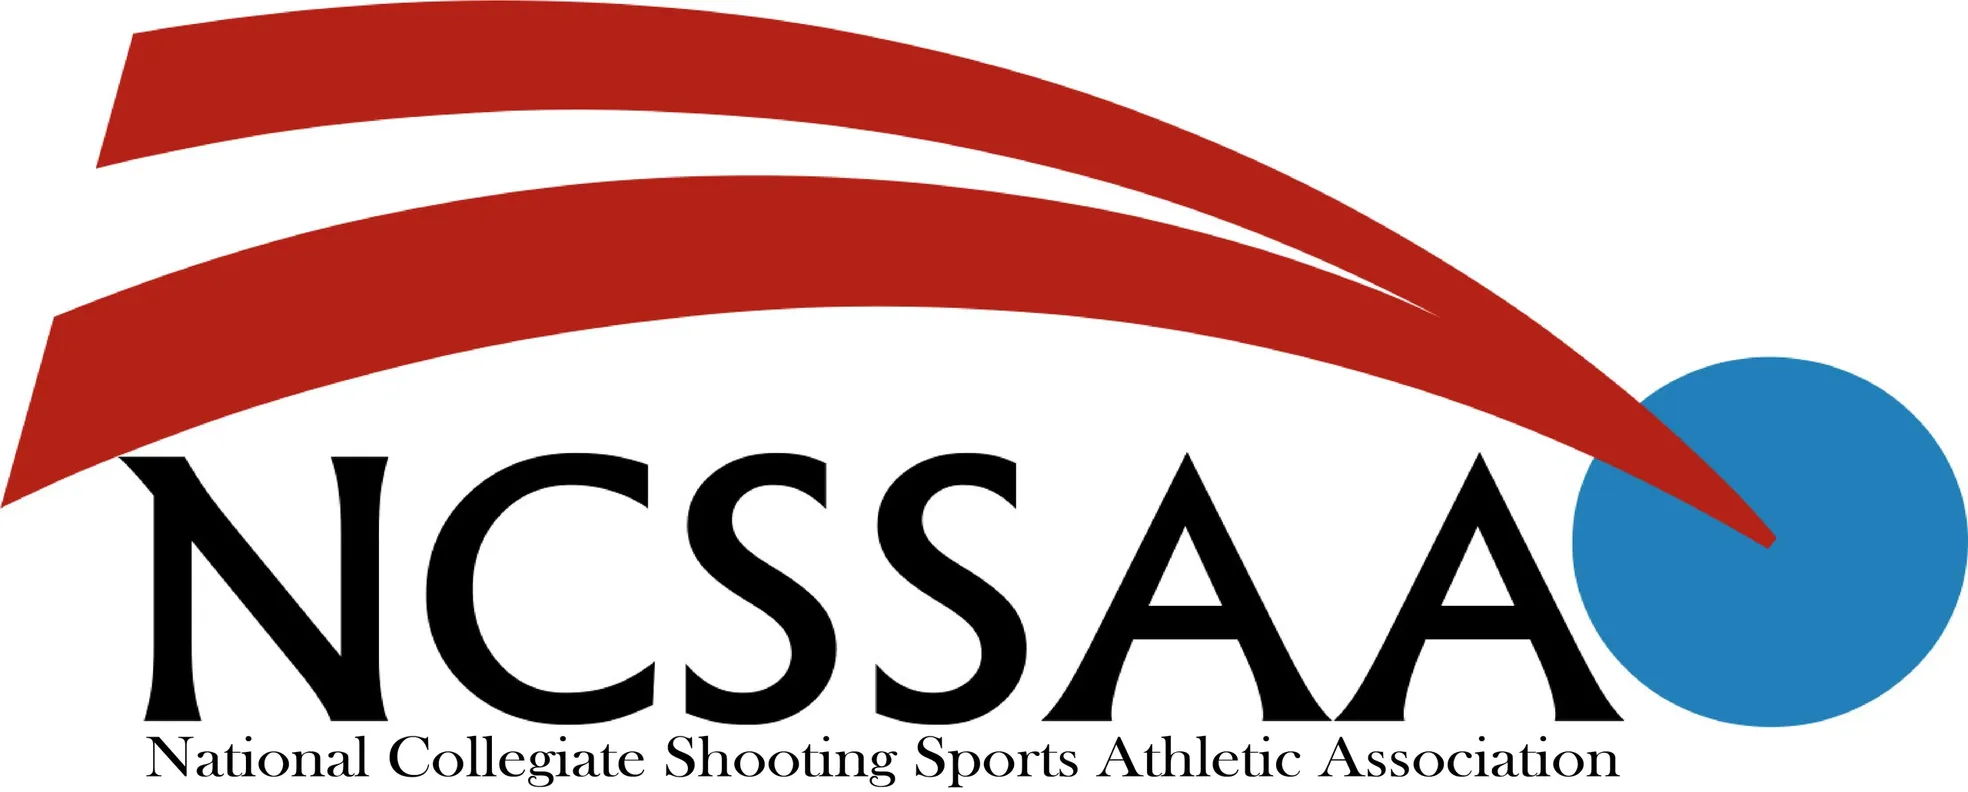 National Collegiate Shooting Sports Athletic Association